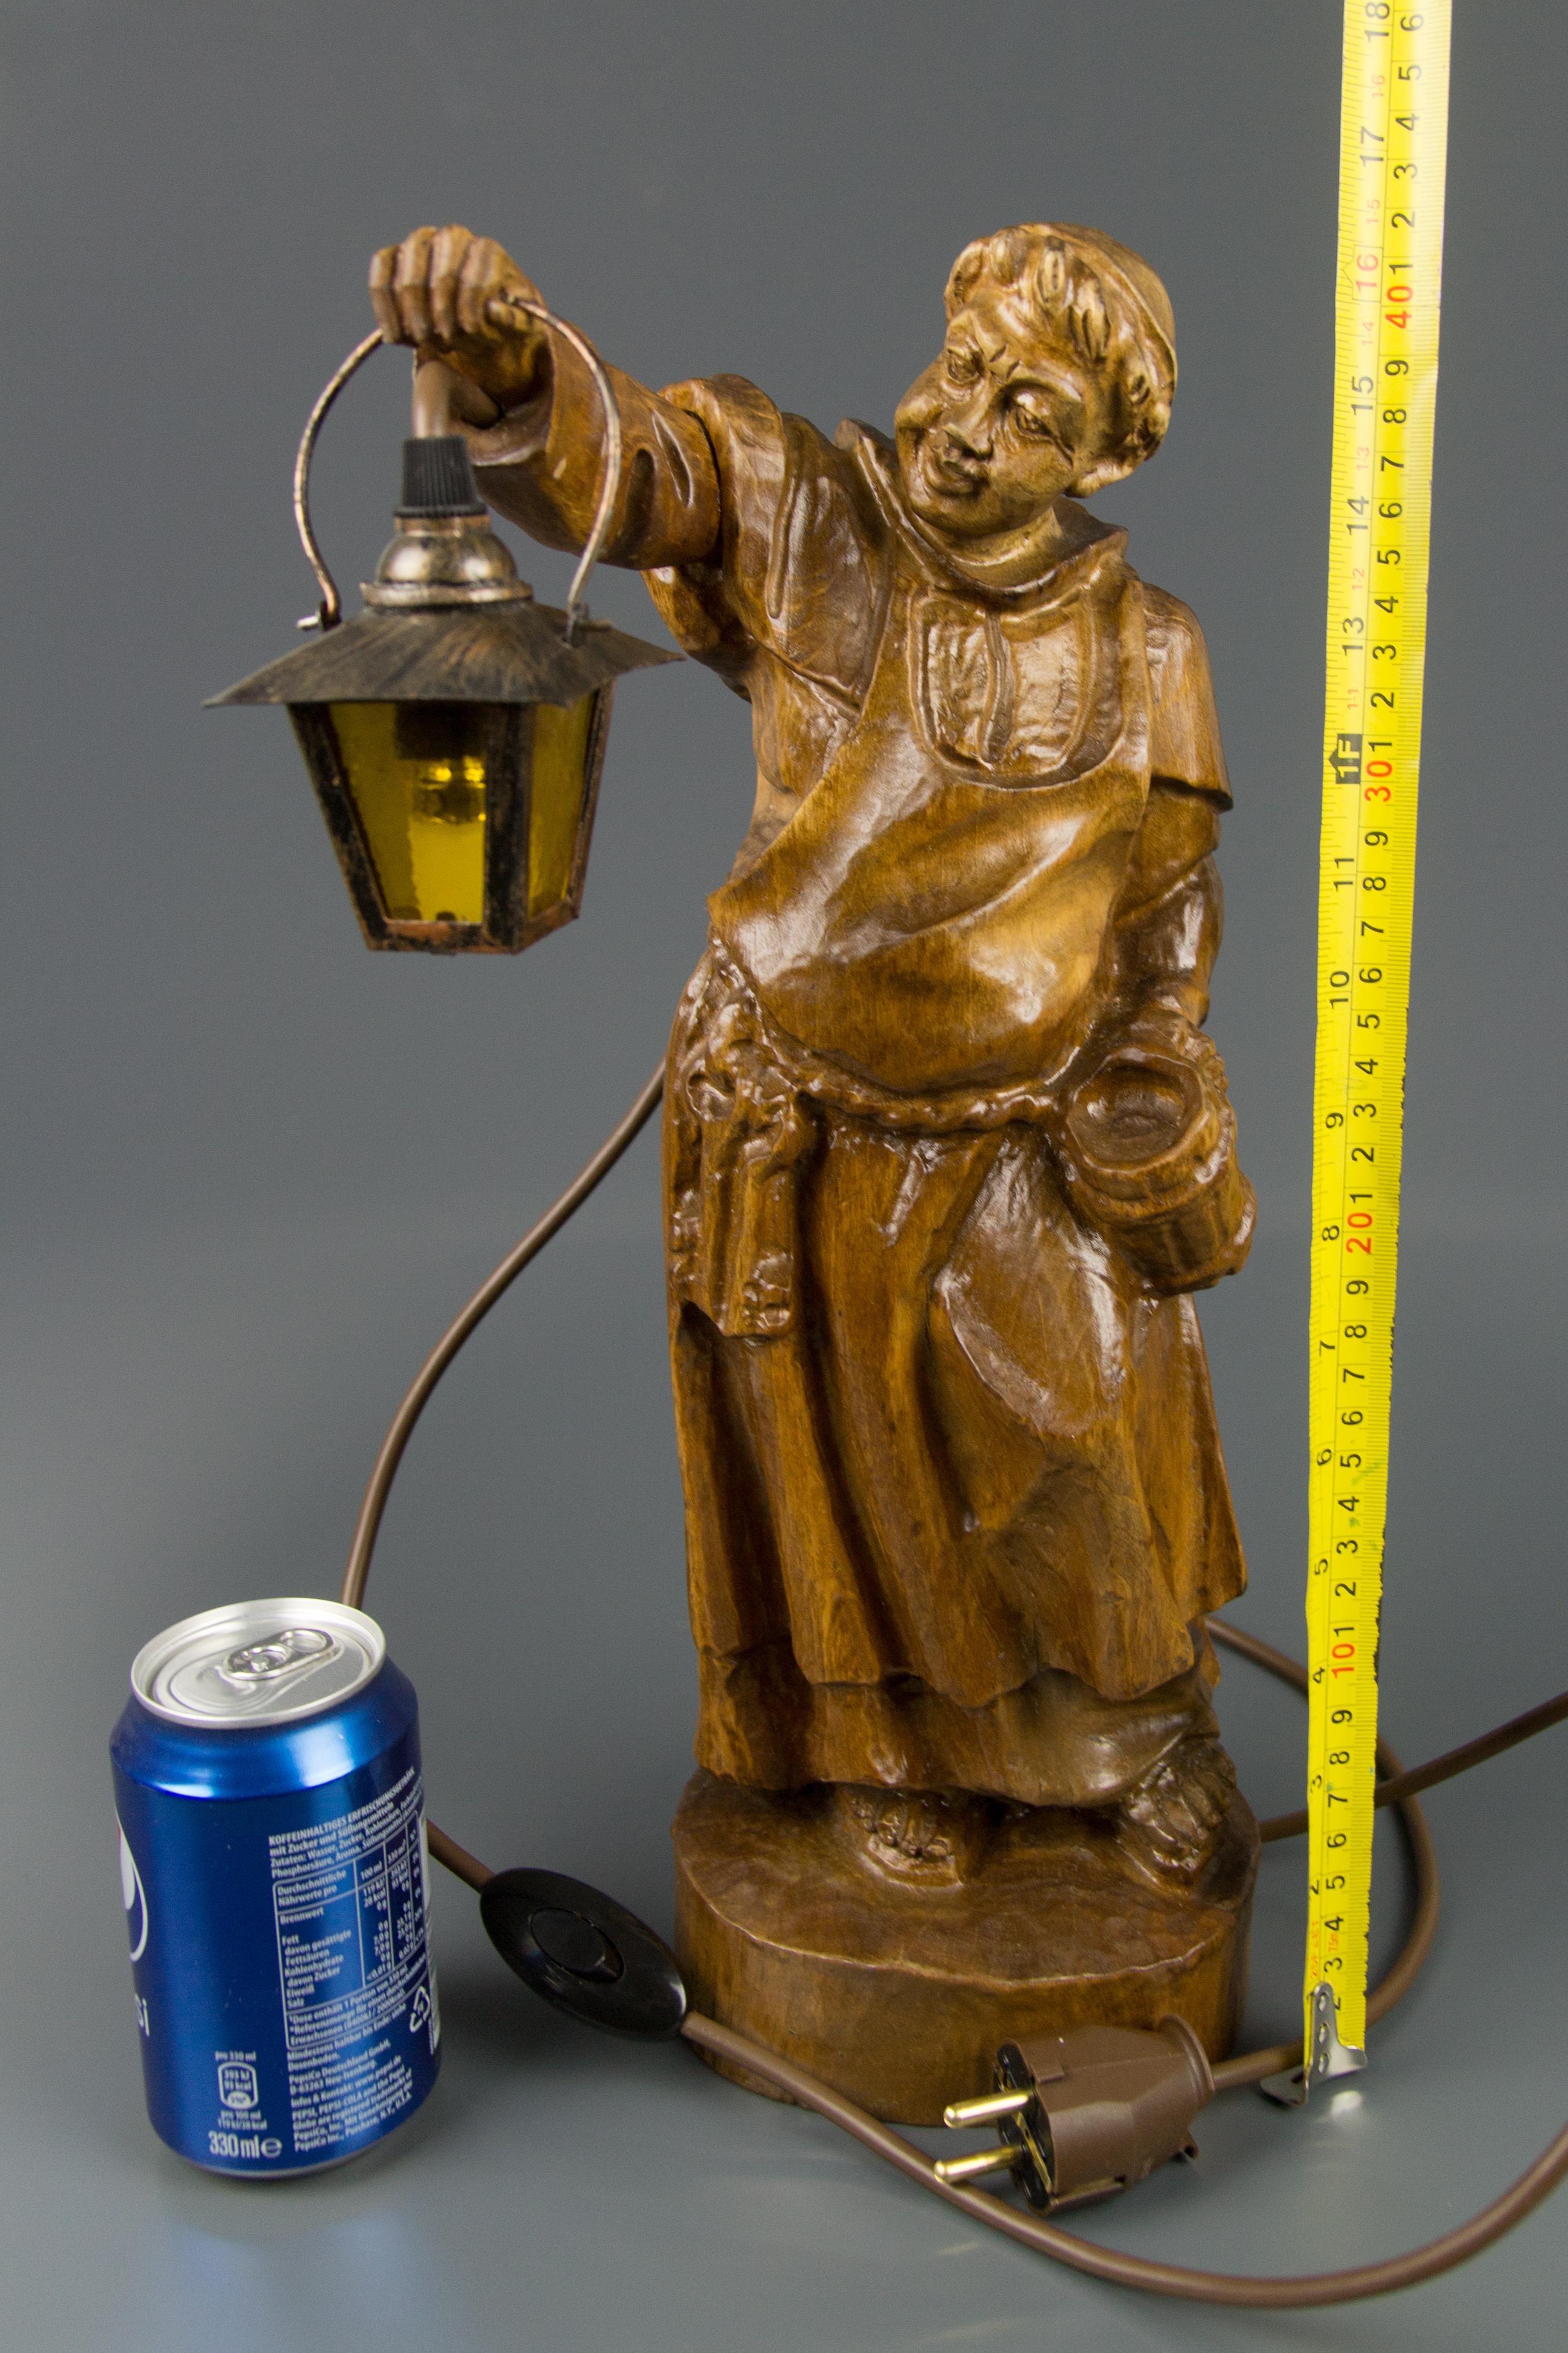 German Hand Carved Wooden Sculpture Figurative Lamp Monk with Lantern 4